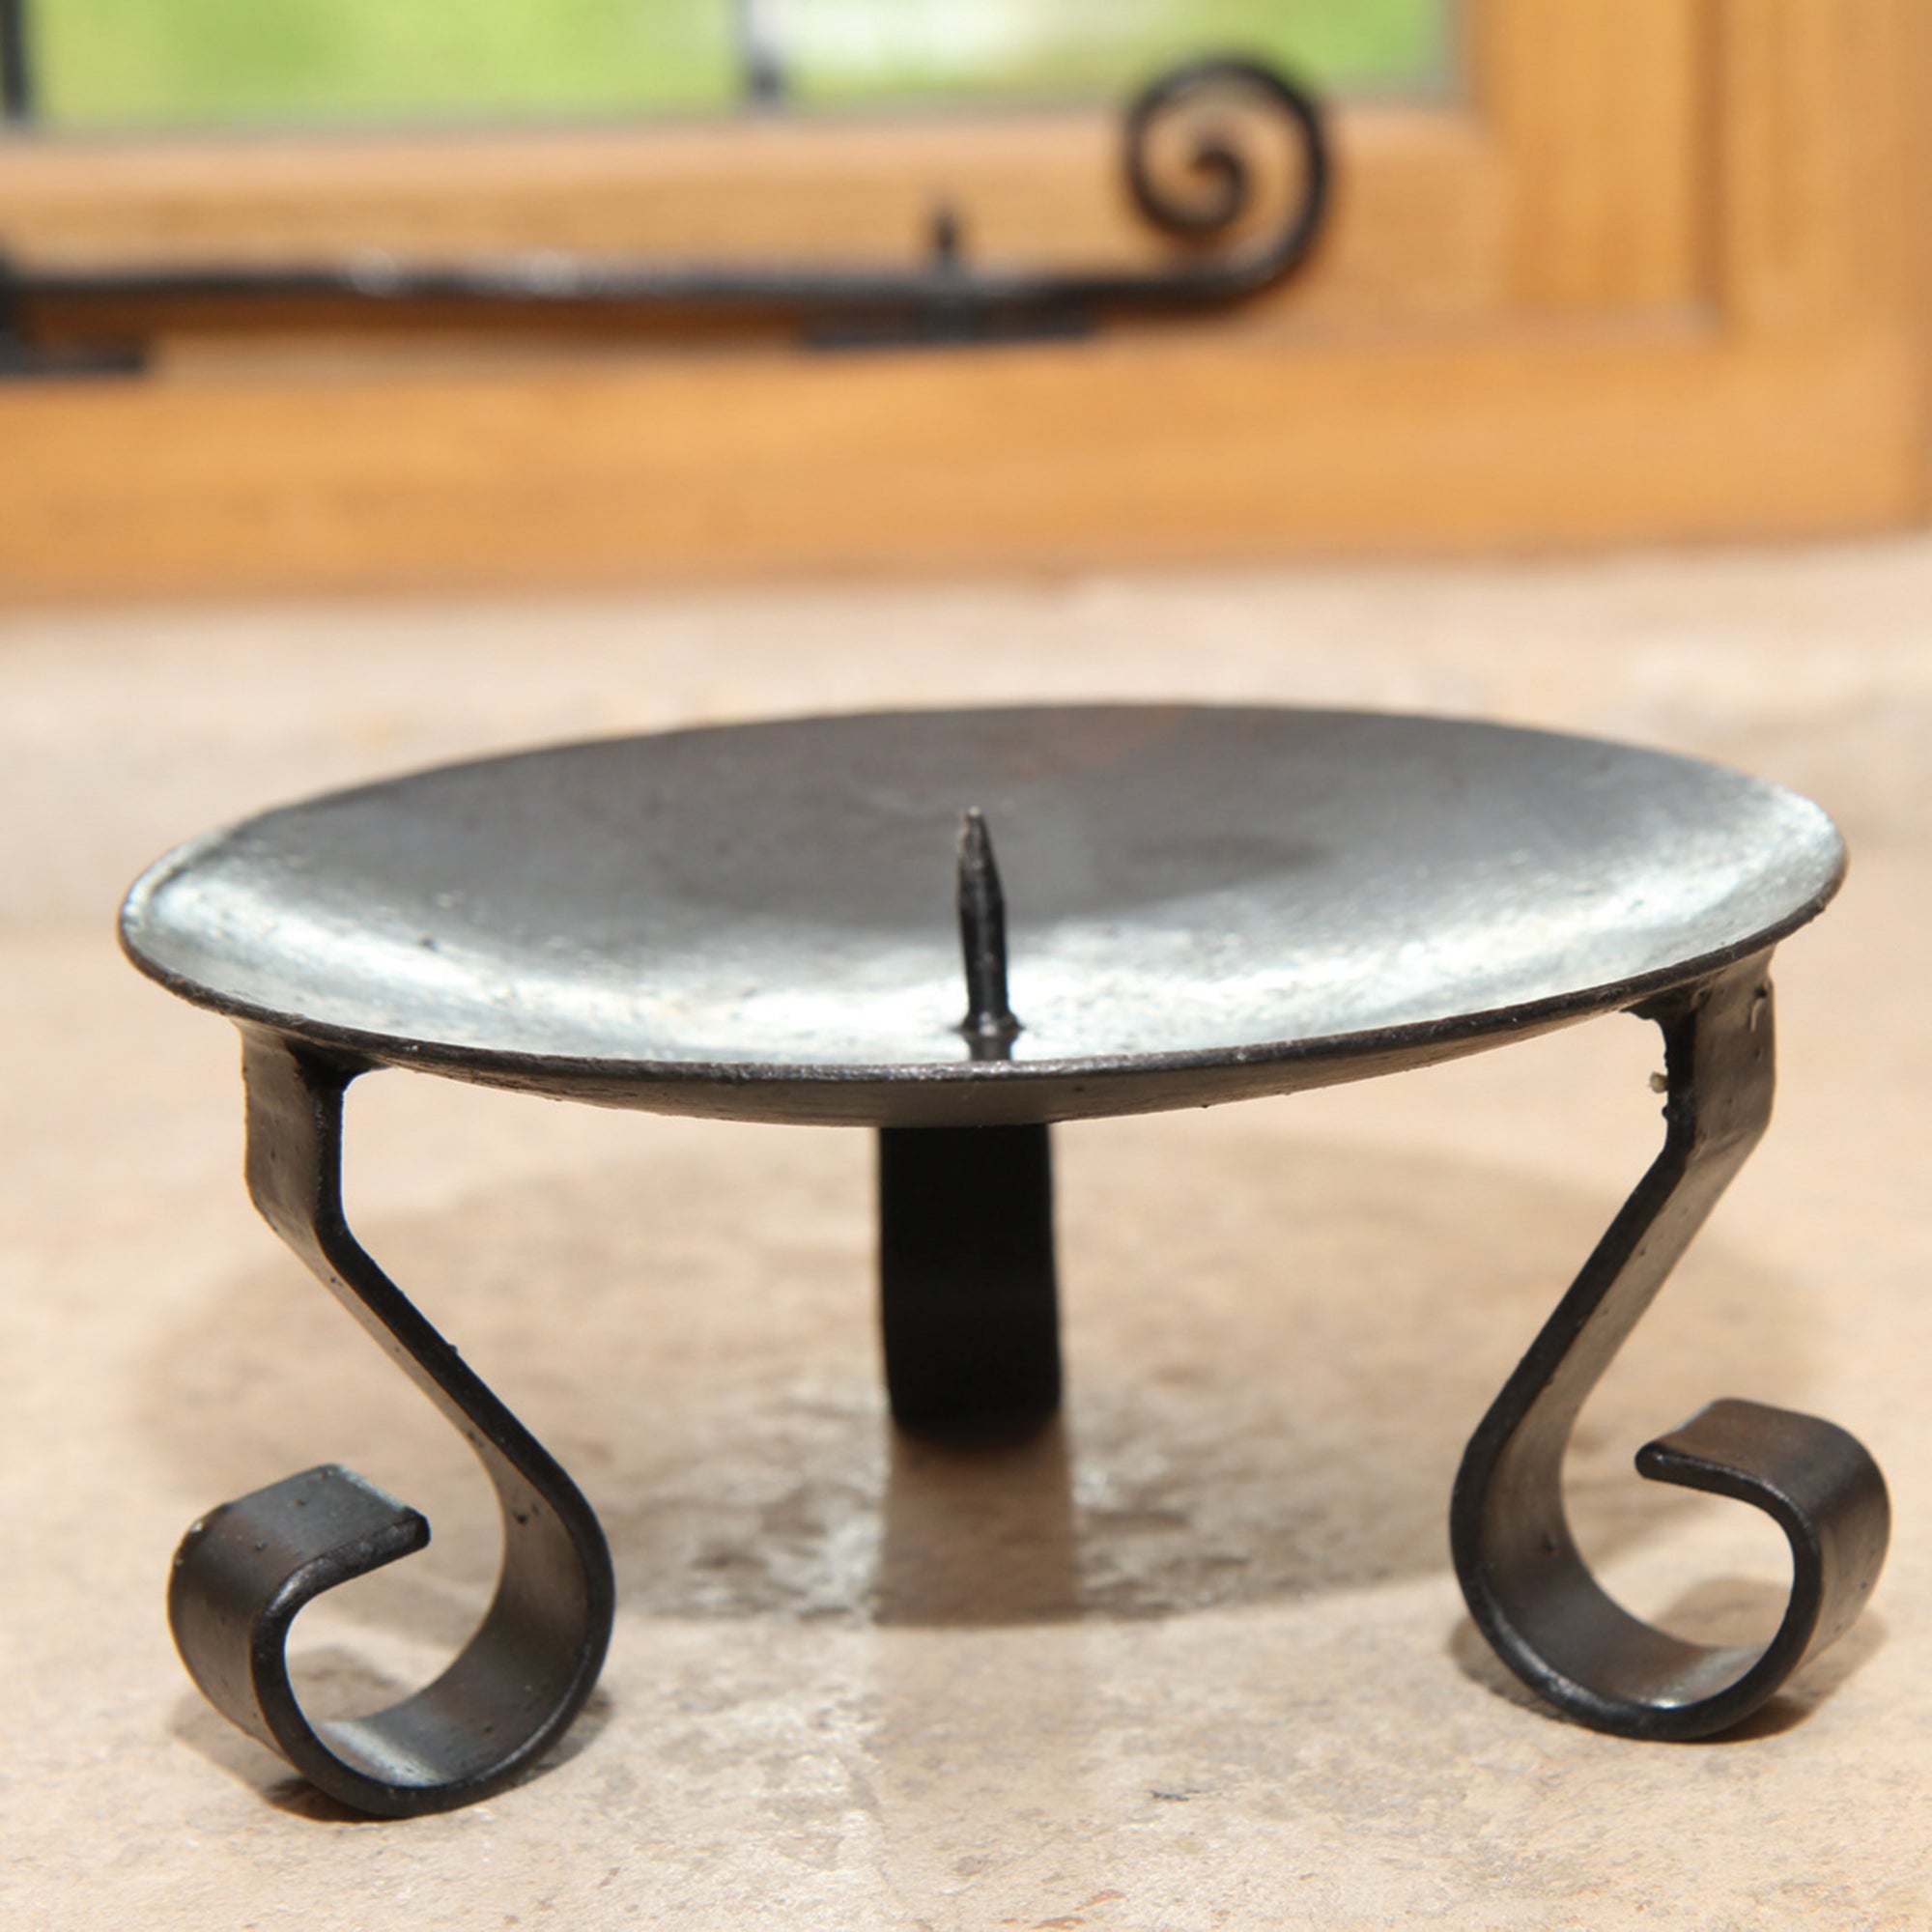 Large (6inch/150mm) Brecon Candle Holder